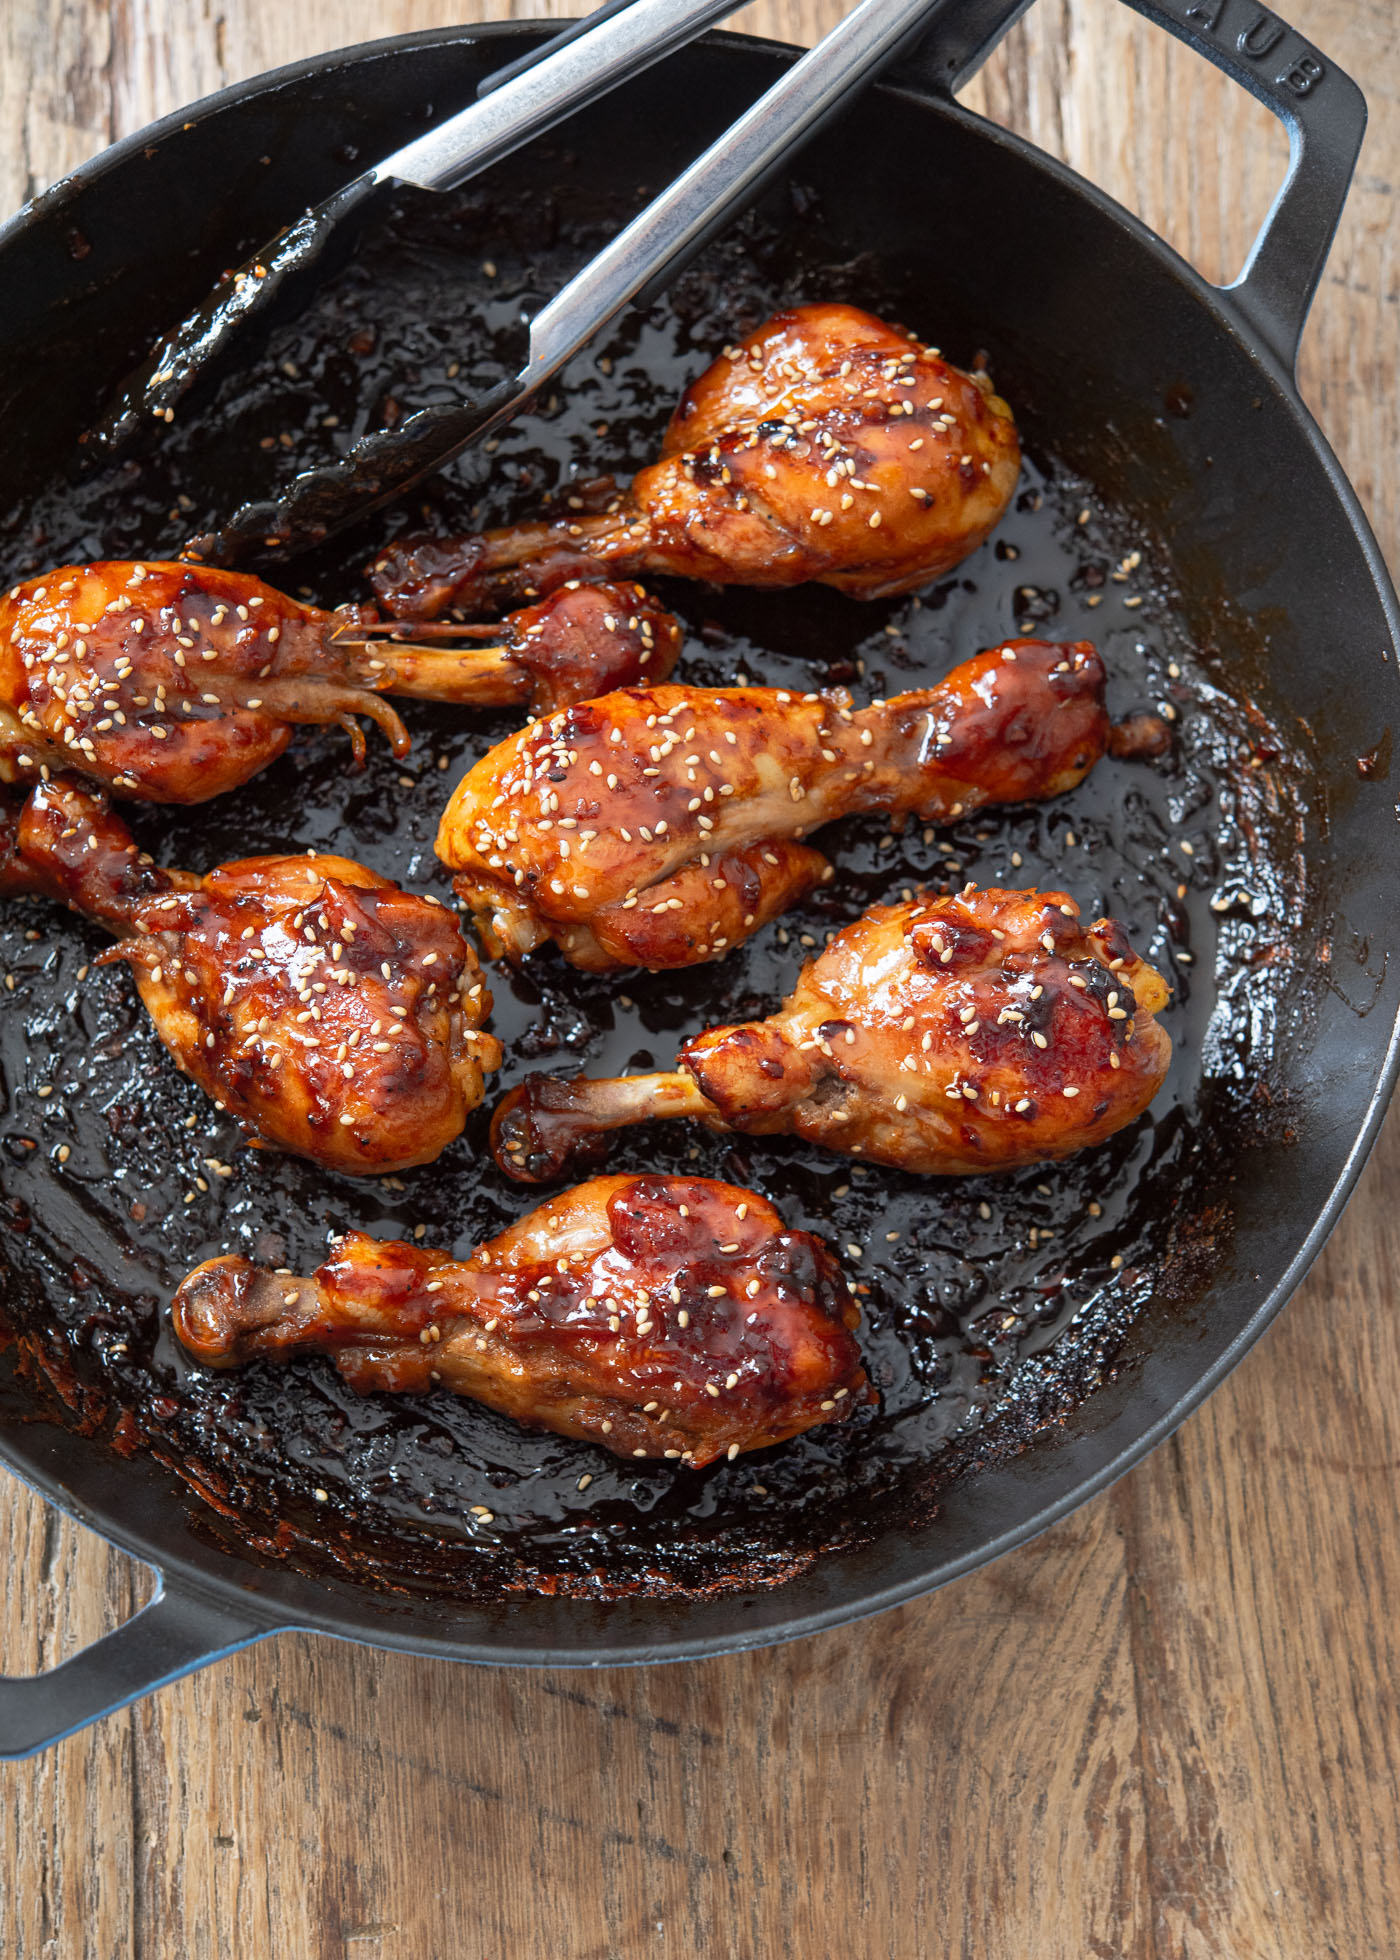 Teriyaki sauce glazed chicken drumsticks are garnished with sesame seeds in a pan with kitchen tongs